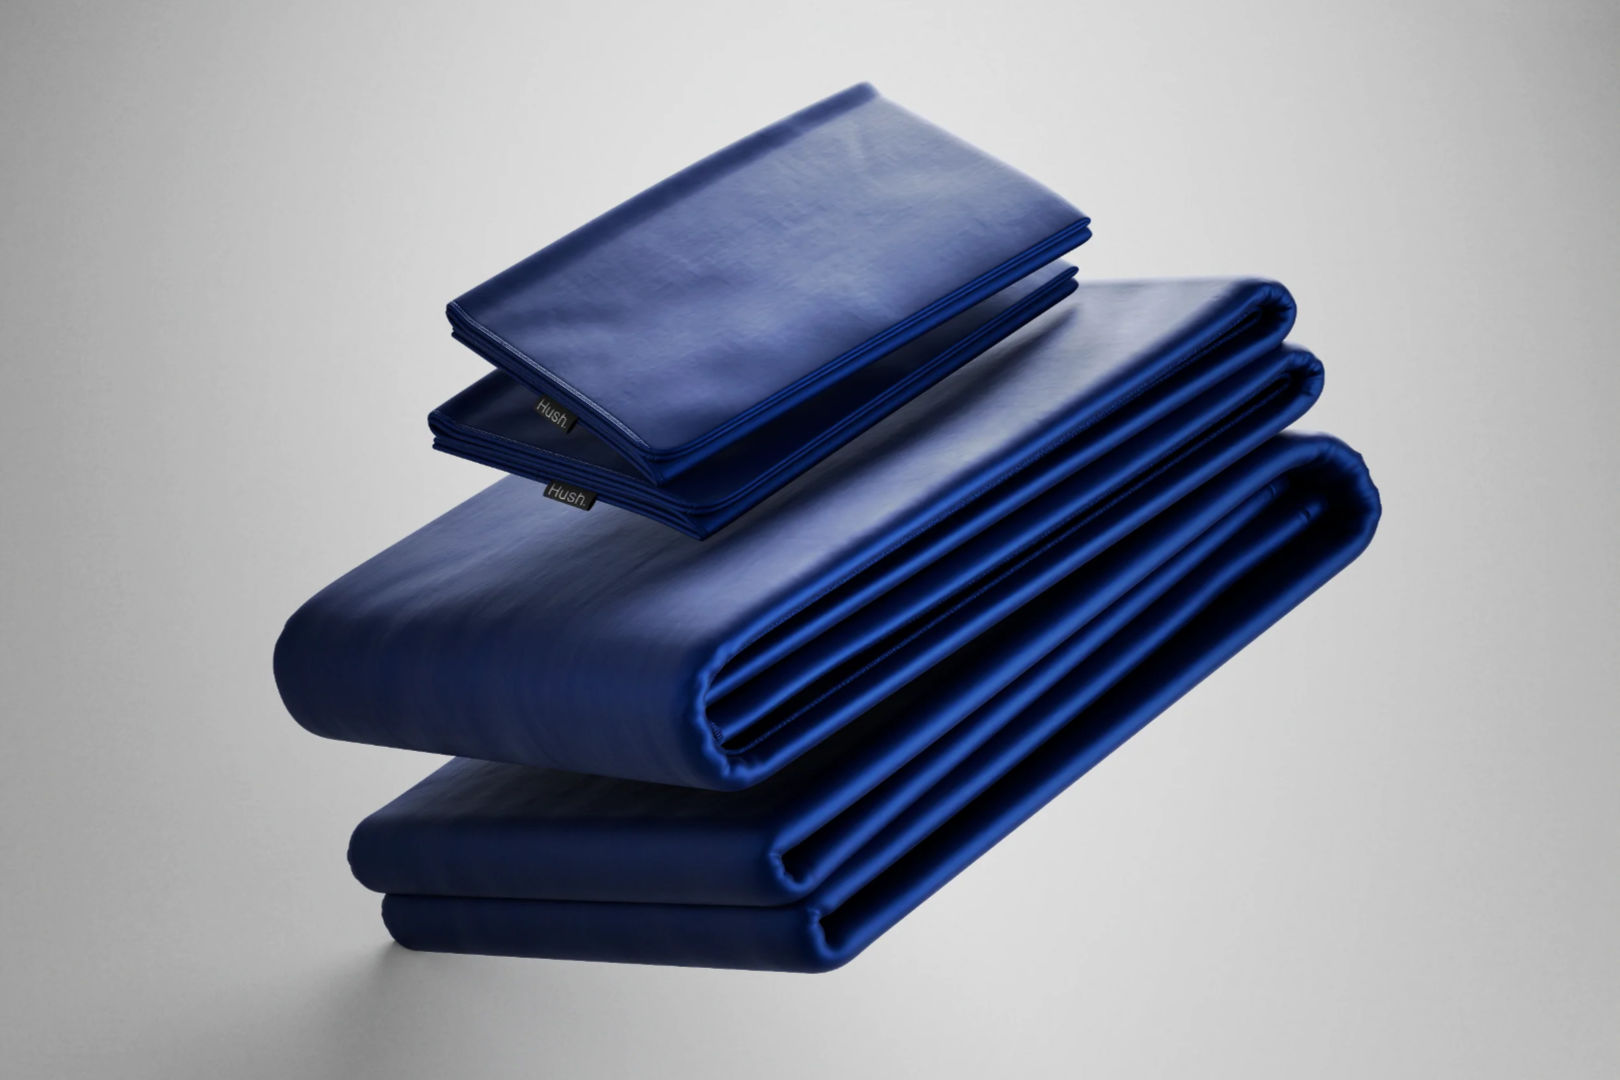 A set of neatly folded Hush Iced 2.0 Bamboo Cooling Sheet and Pillowcase in navy blue color in a light grey background.